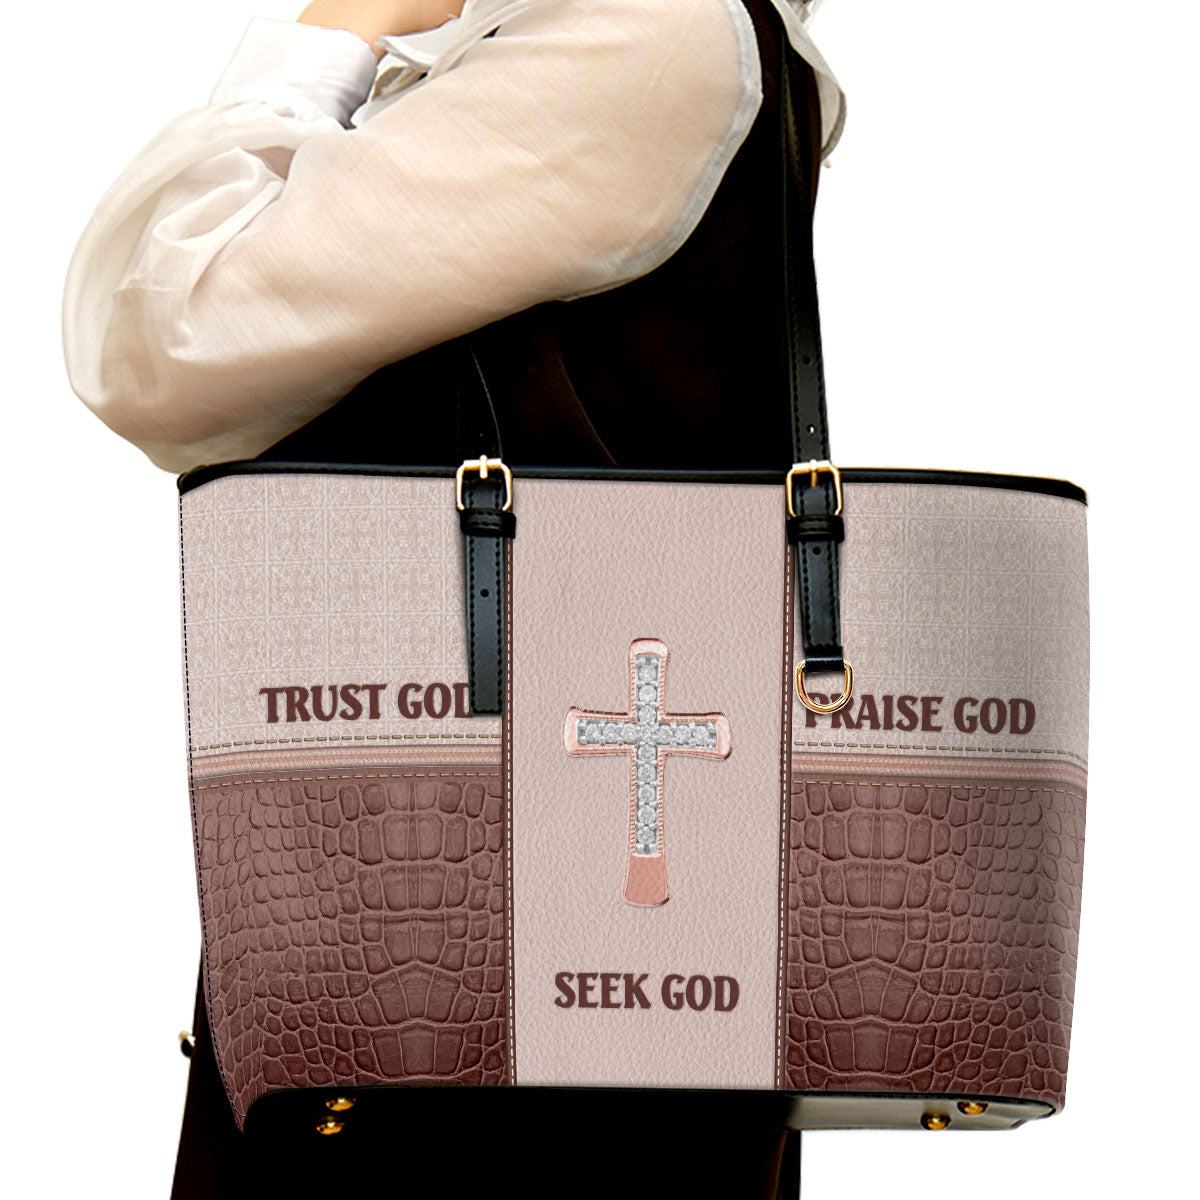 Seek God Trust God Praise God Large Leather Tote Bag - Christ Gifts For Religious Women - Best Mother's Day Gifts